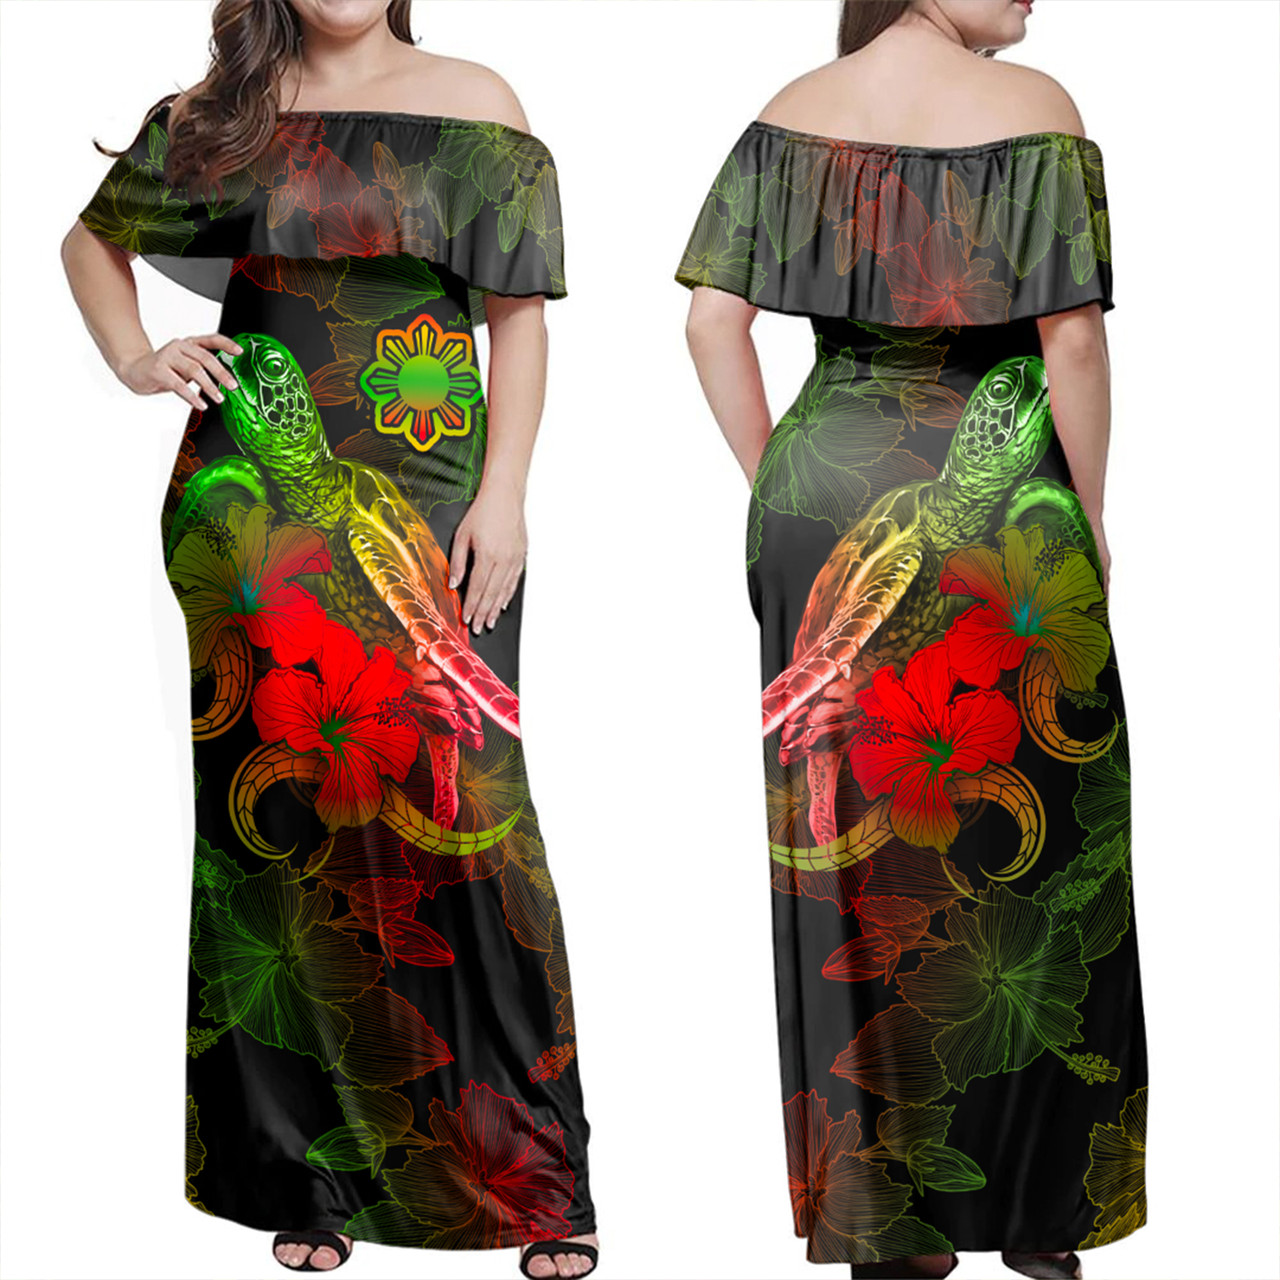 Philippines Filipinos Woman Off Shoulder Long Dress - Sea Turtle With Blooming Hibiscus Flowers Reggae